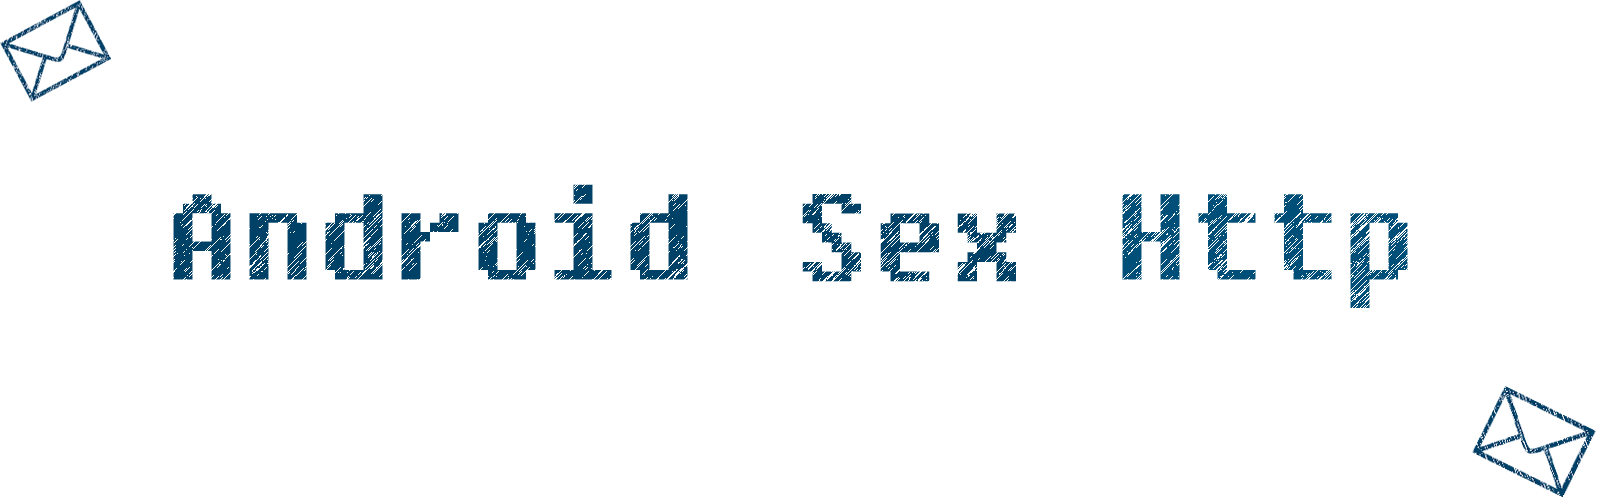 android-sex-http